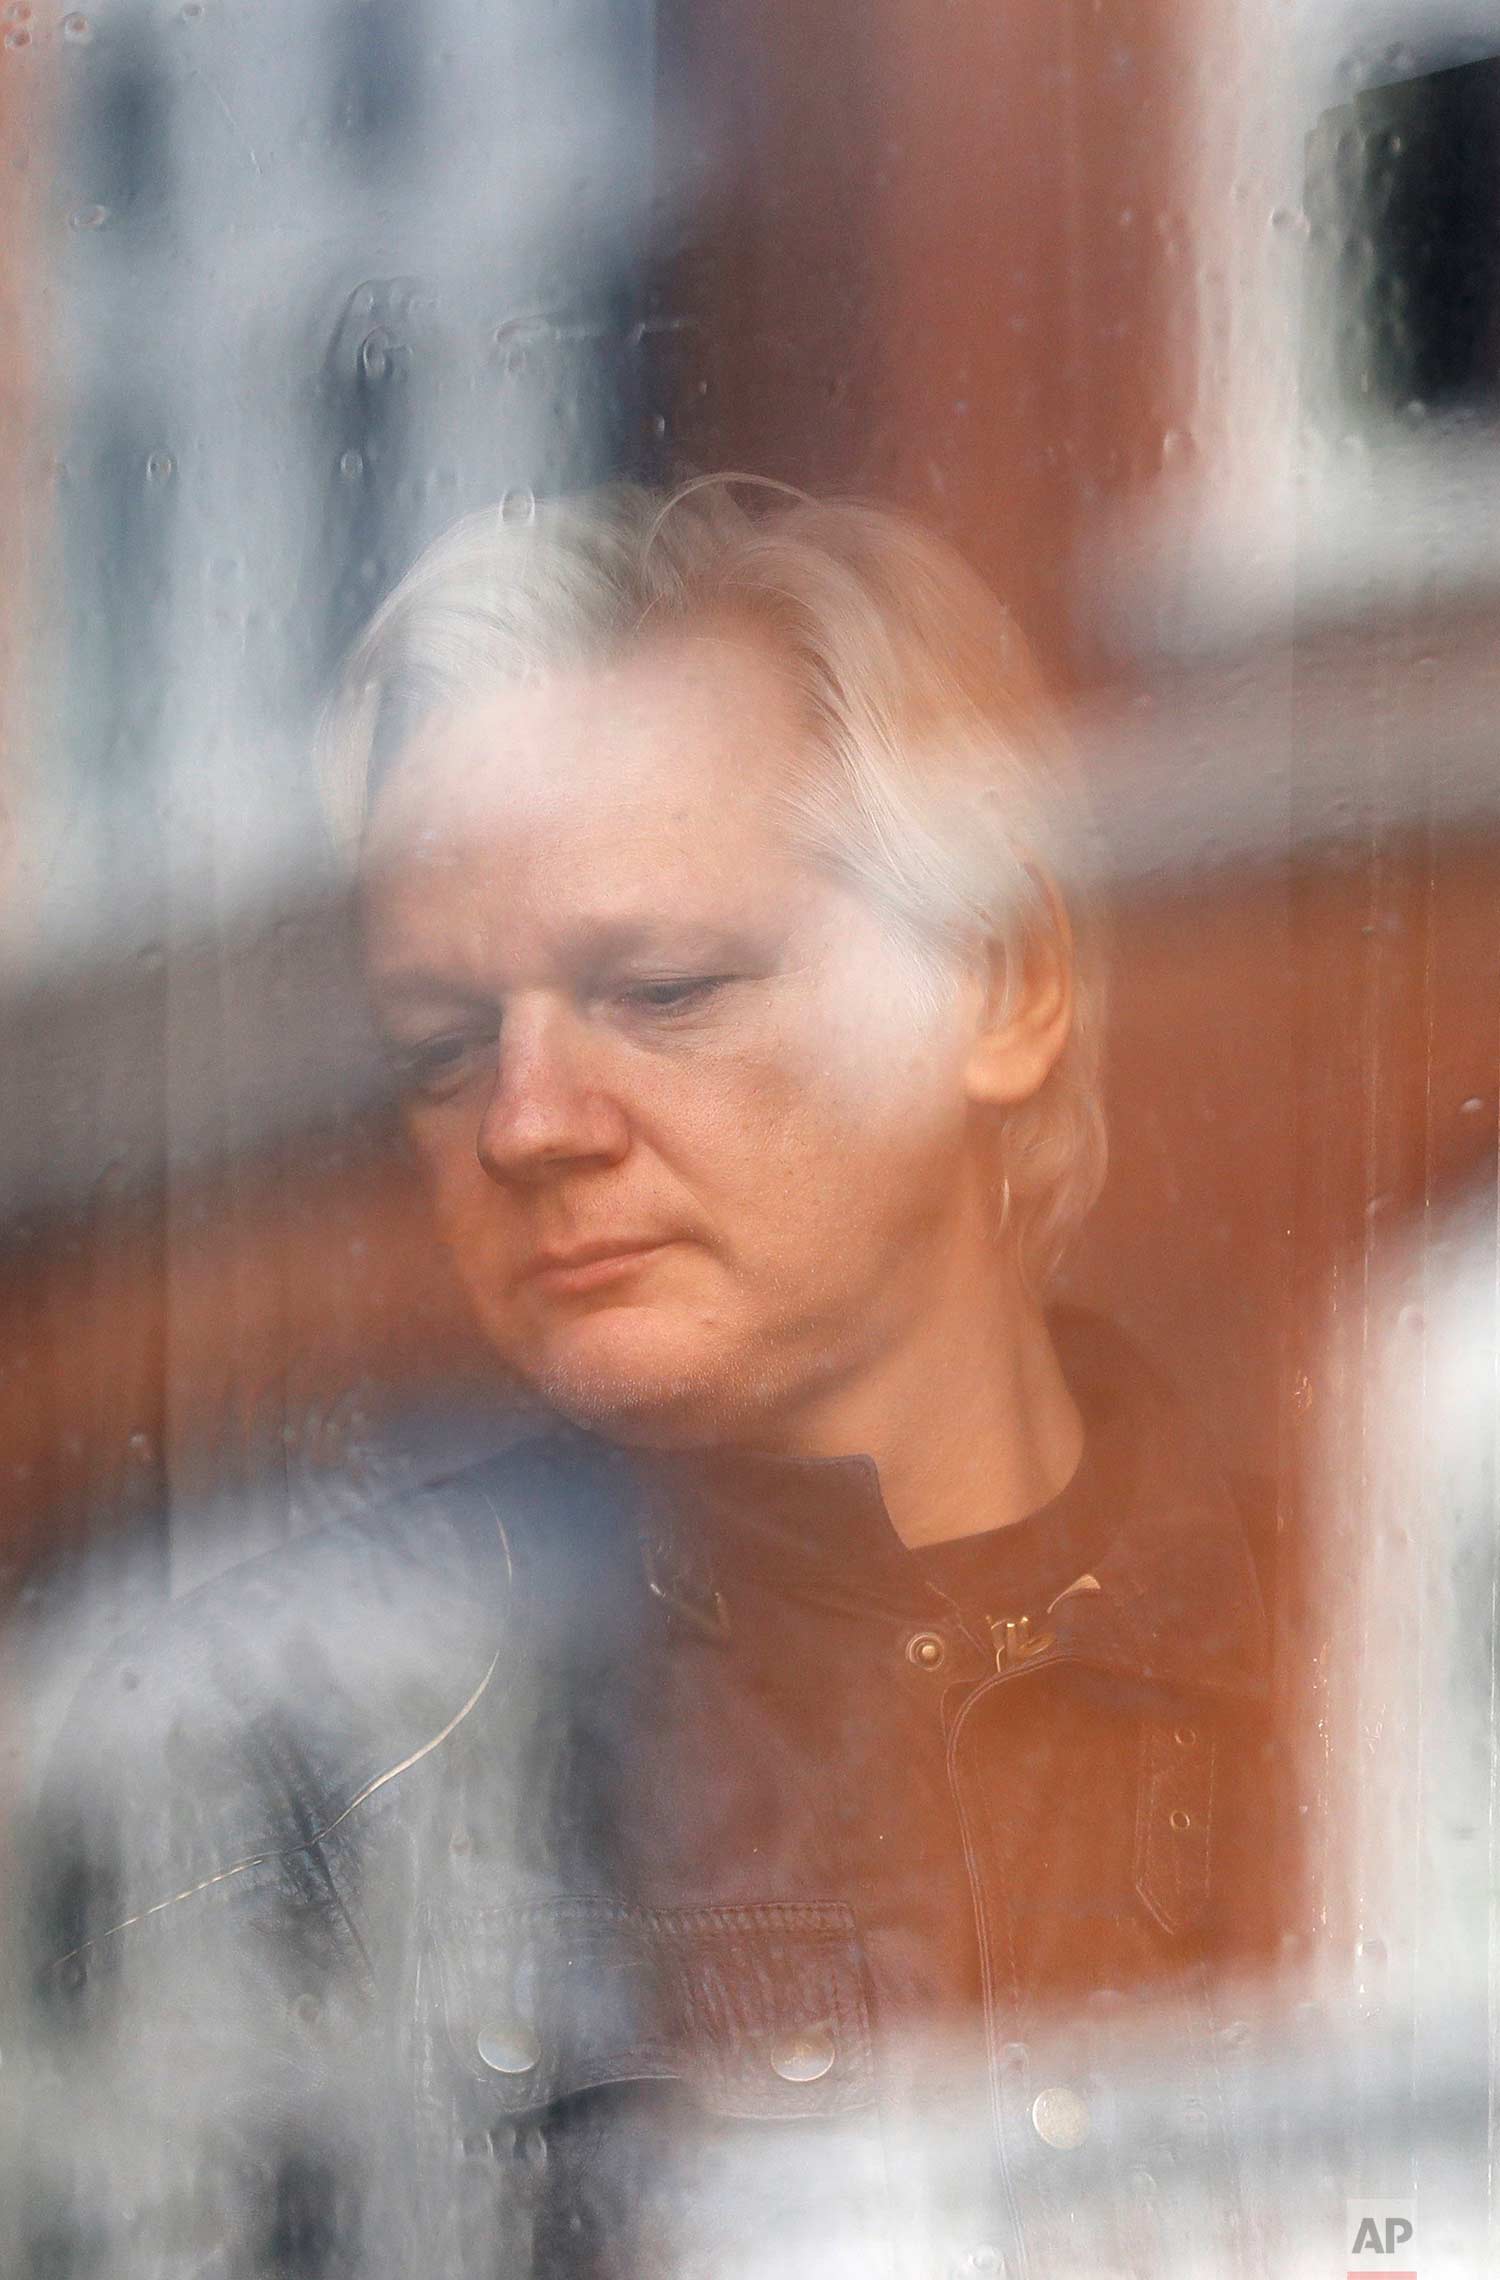  In this Friday May 19, 2017 photo, Julian Assange looks out the window from the Ecuadorian embassy in London. Sweden's top prosecutor says she is dropping an investigation into a rape claim against WikiLeaks founder Julian Assange after almost seven